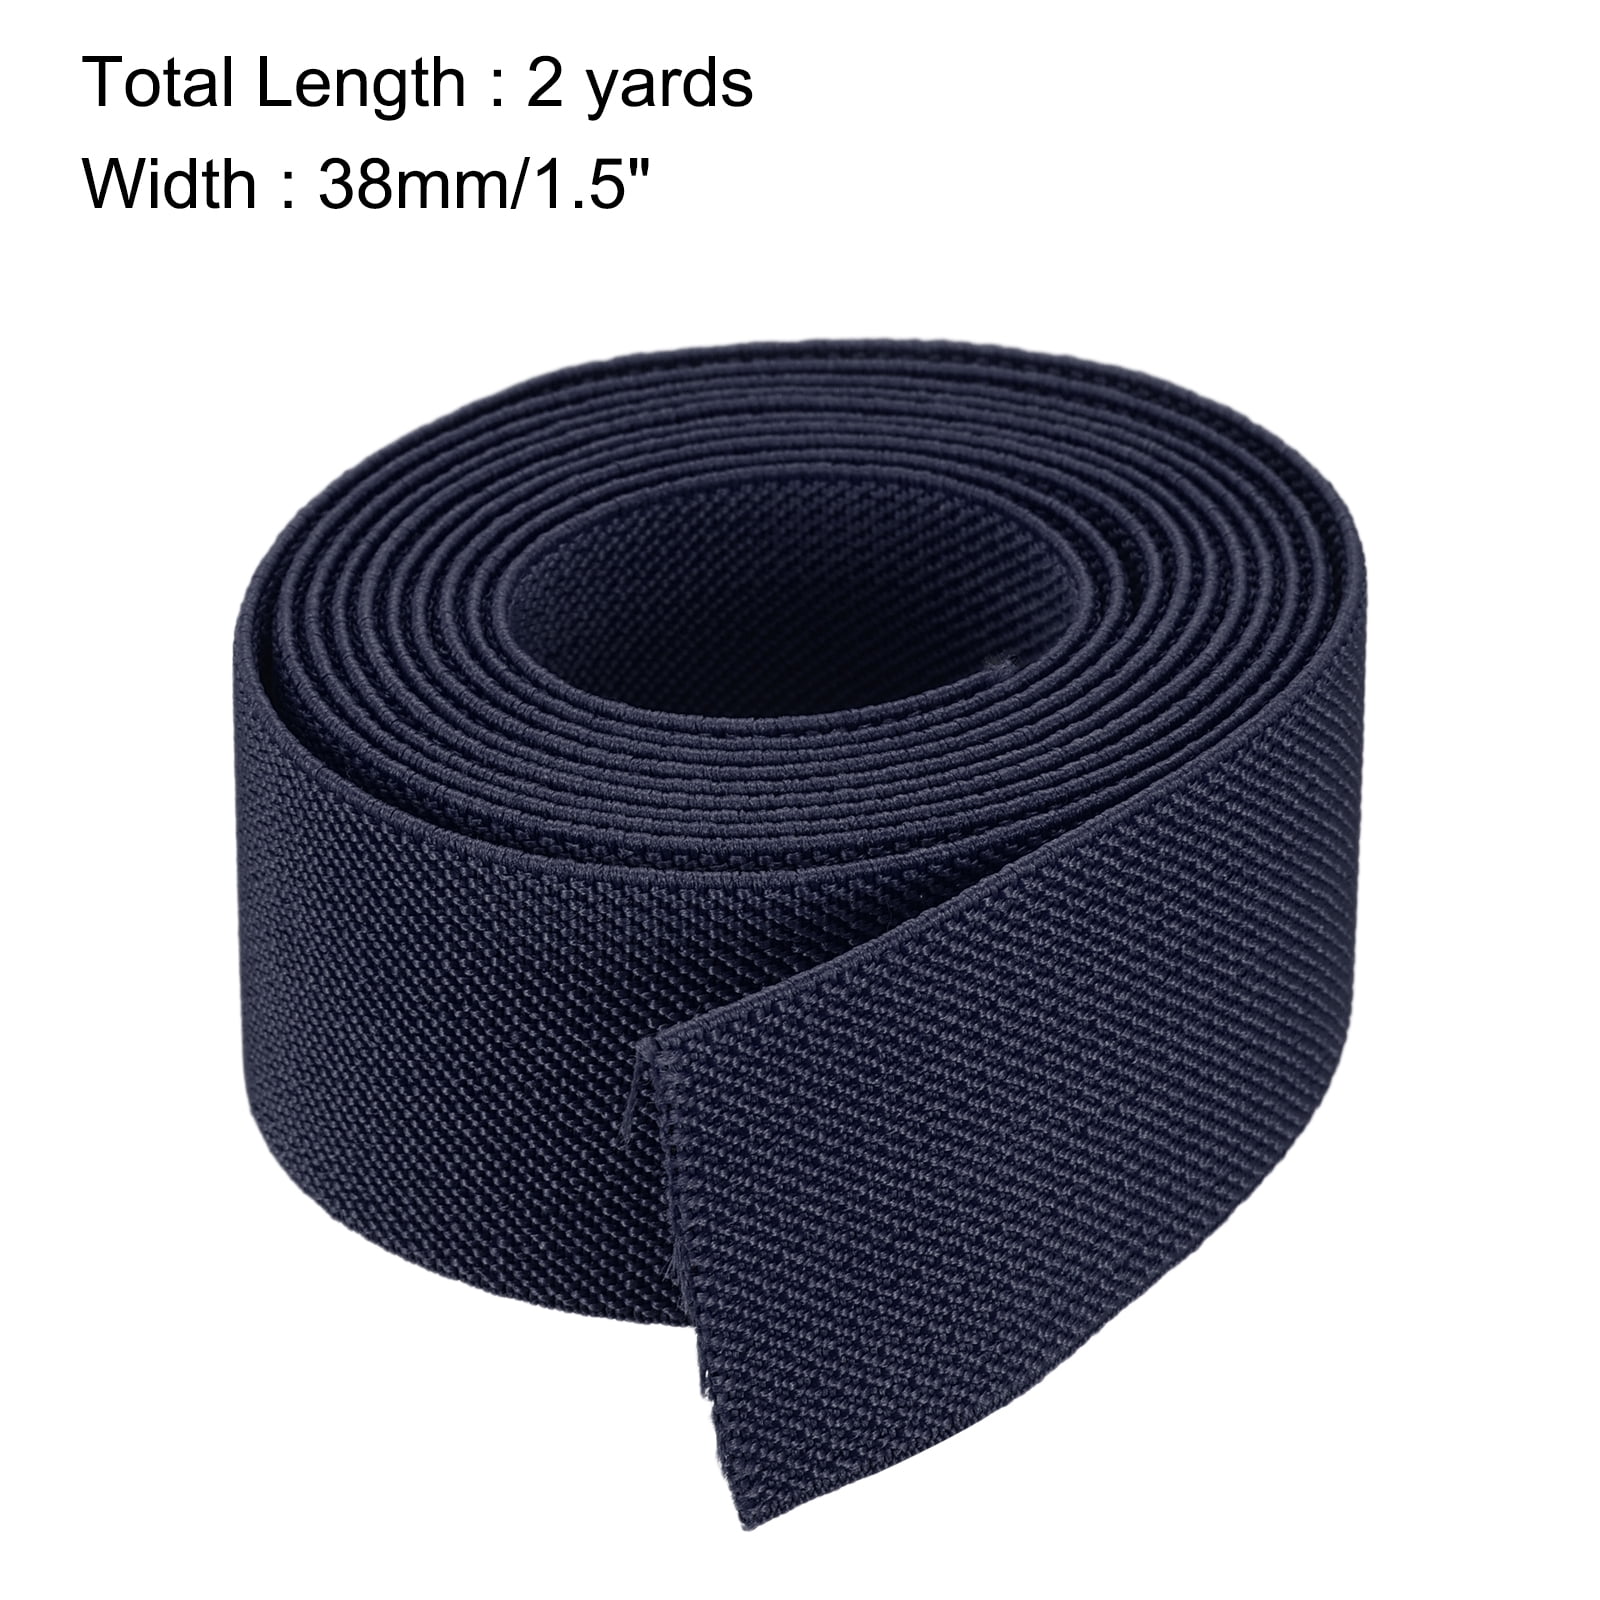 Sewing Elastic Band 1-Inch by 5-Yard Black Colored Double-Side Twill Woven  Elastic